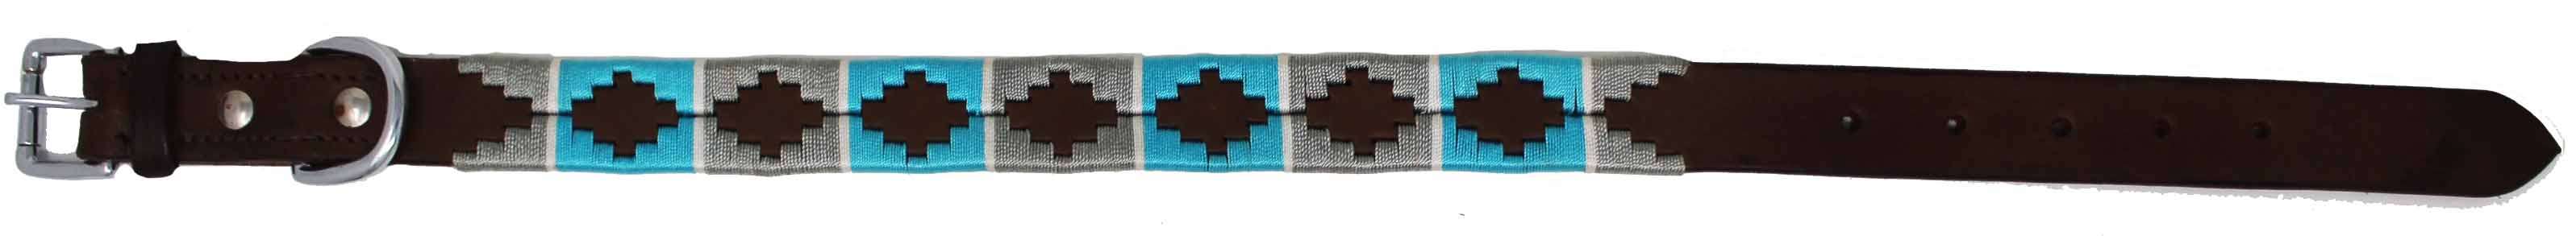 Leather Argentine Polo Embroidered Dog Collar D-Ring 60FH03